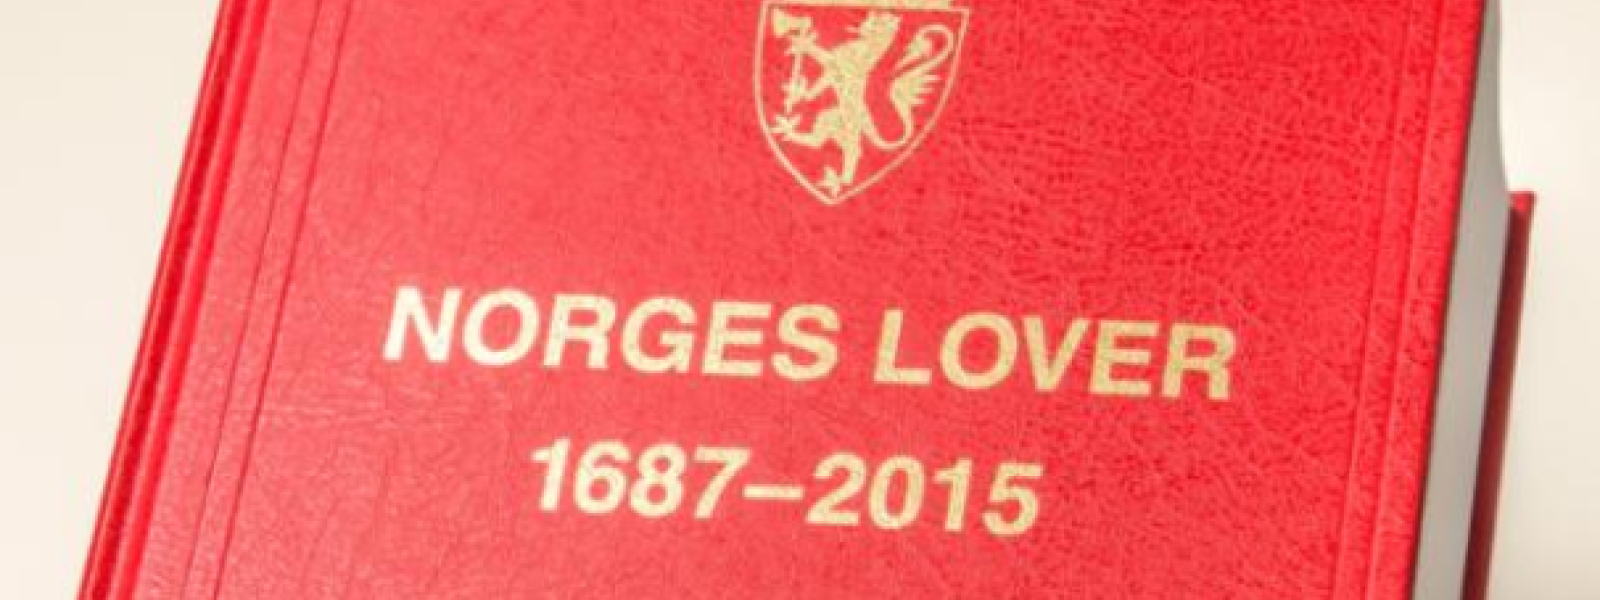 Norges Lover